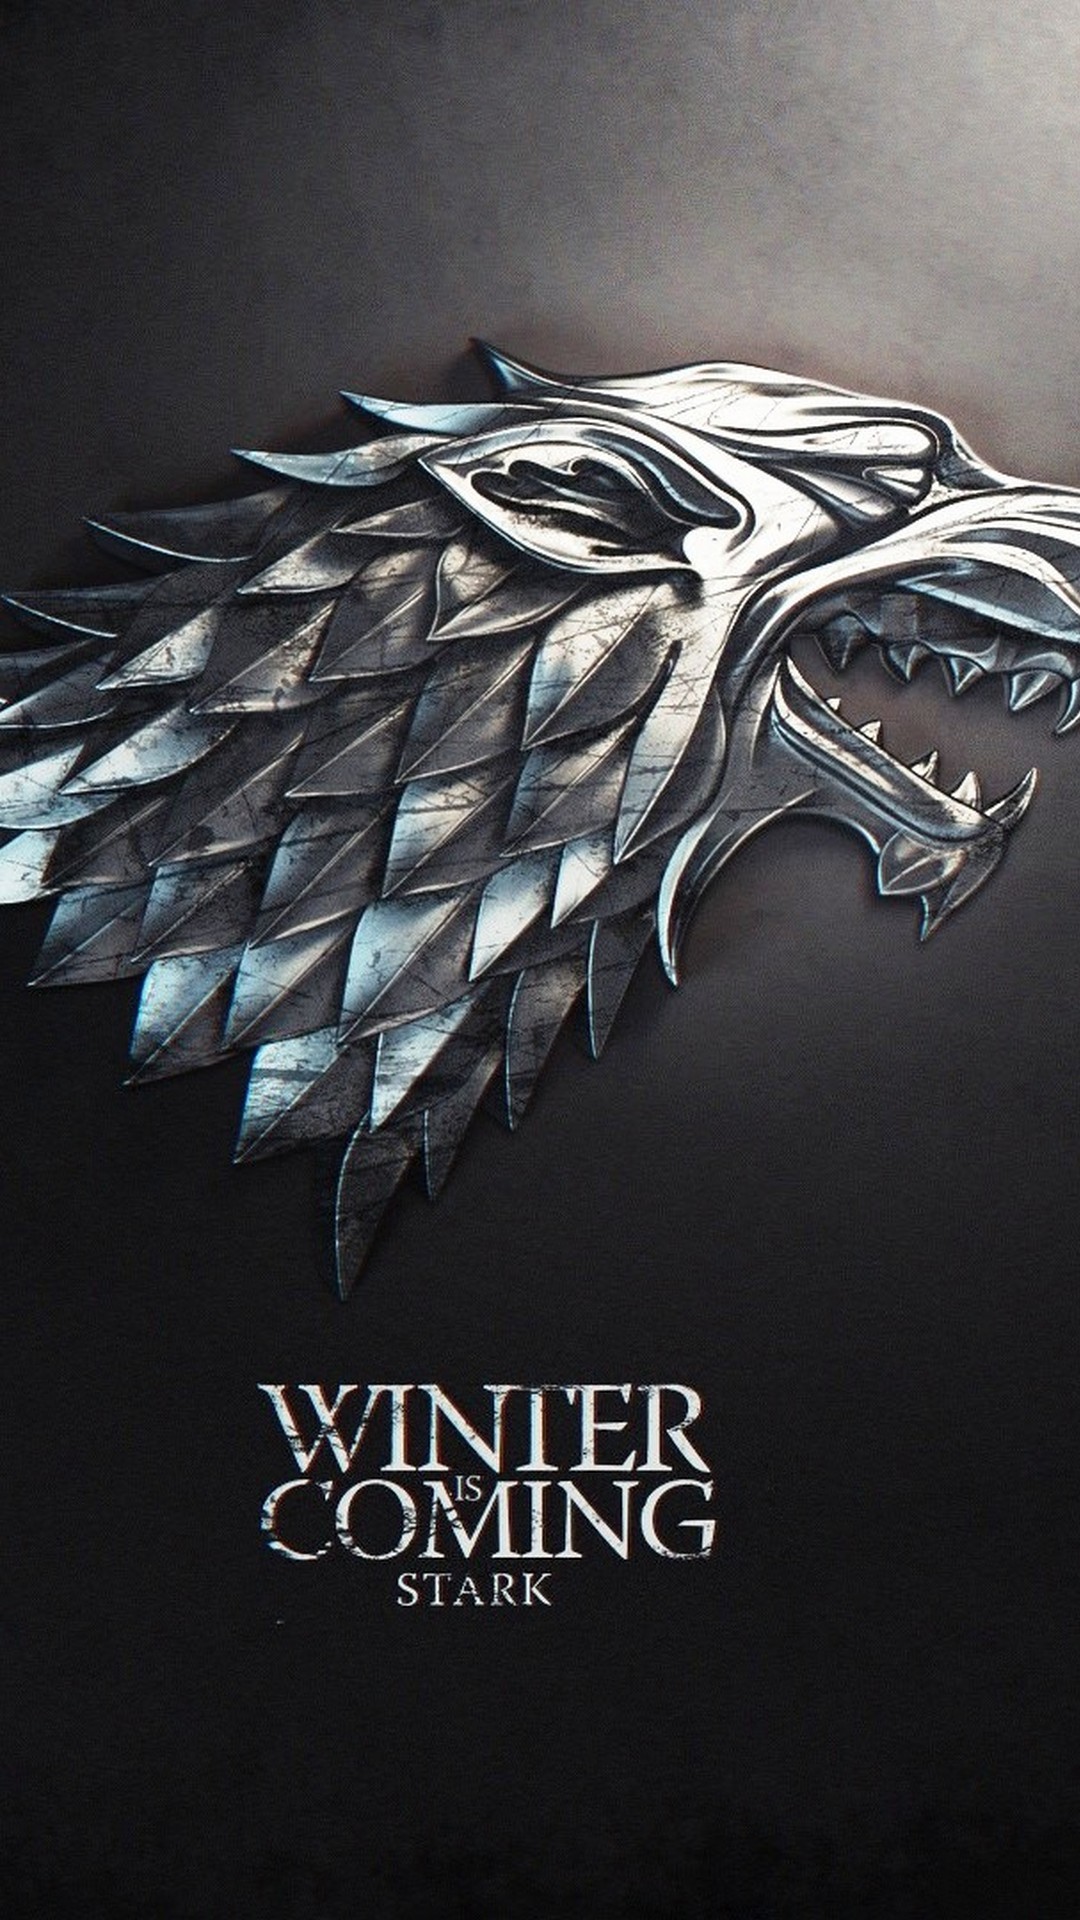 House Stark Game of Thrones Phone Wallpaper with high-resolution 1080x1920 pixel. Download all Mobile Wallpapers and Use them as wallpapers for your iPhone, Tablet, iPad, Android and other mobile devices